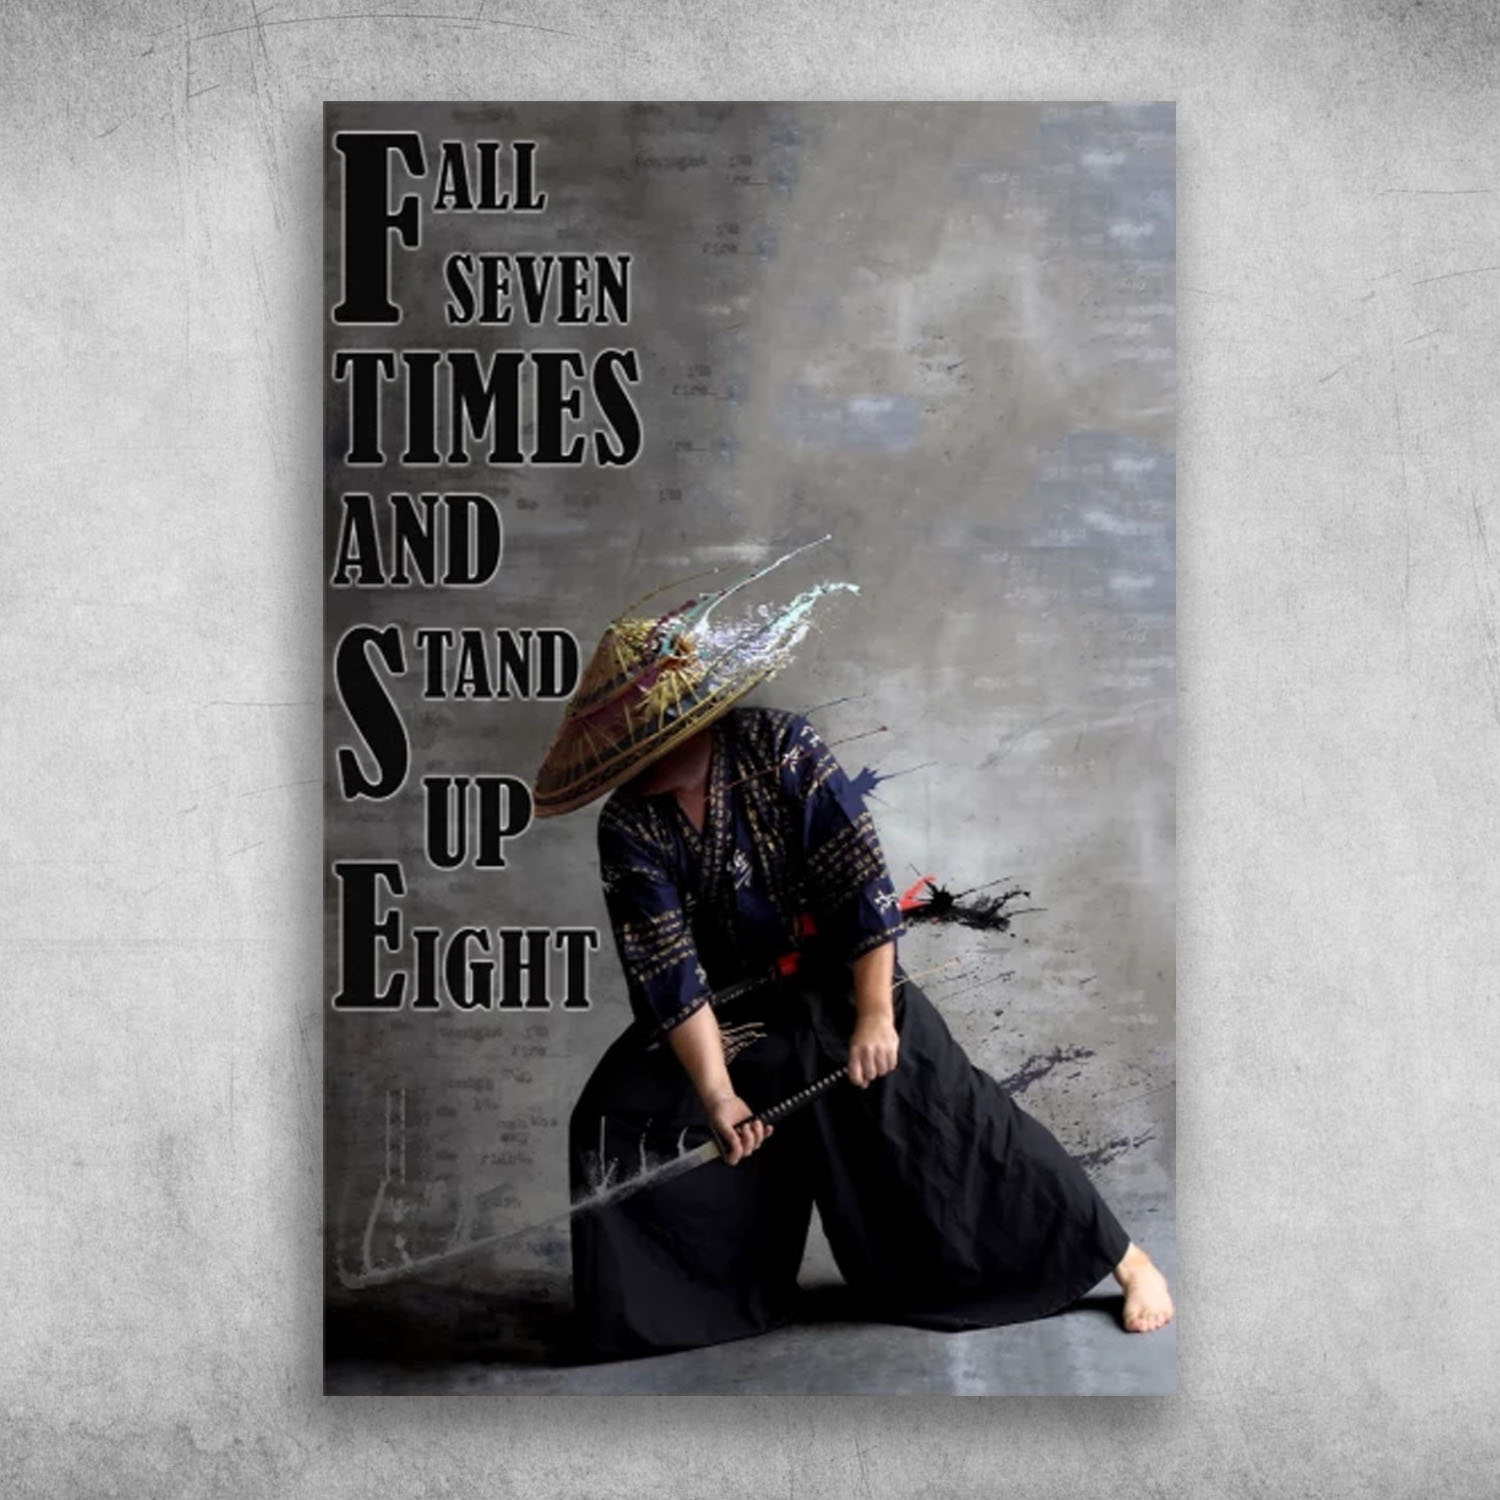 Fall Seven Times And Stand Up Eight Samurai